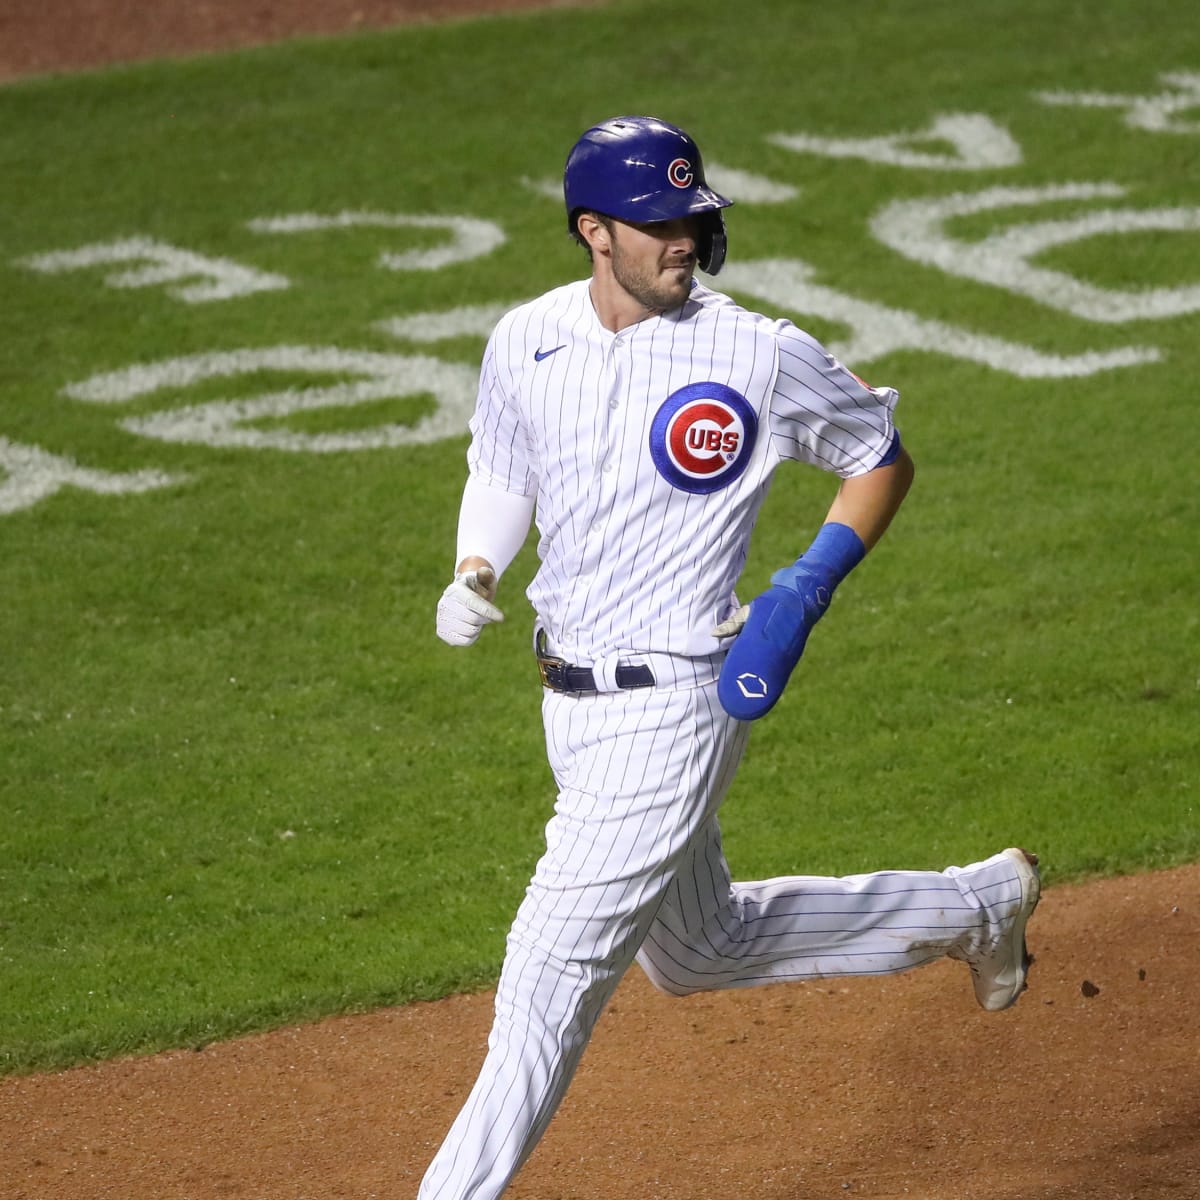 Should the Detroit Tigers be considering signing Kris Bryant?